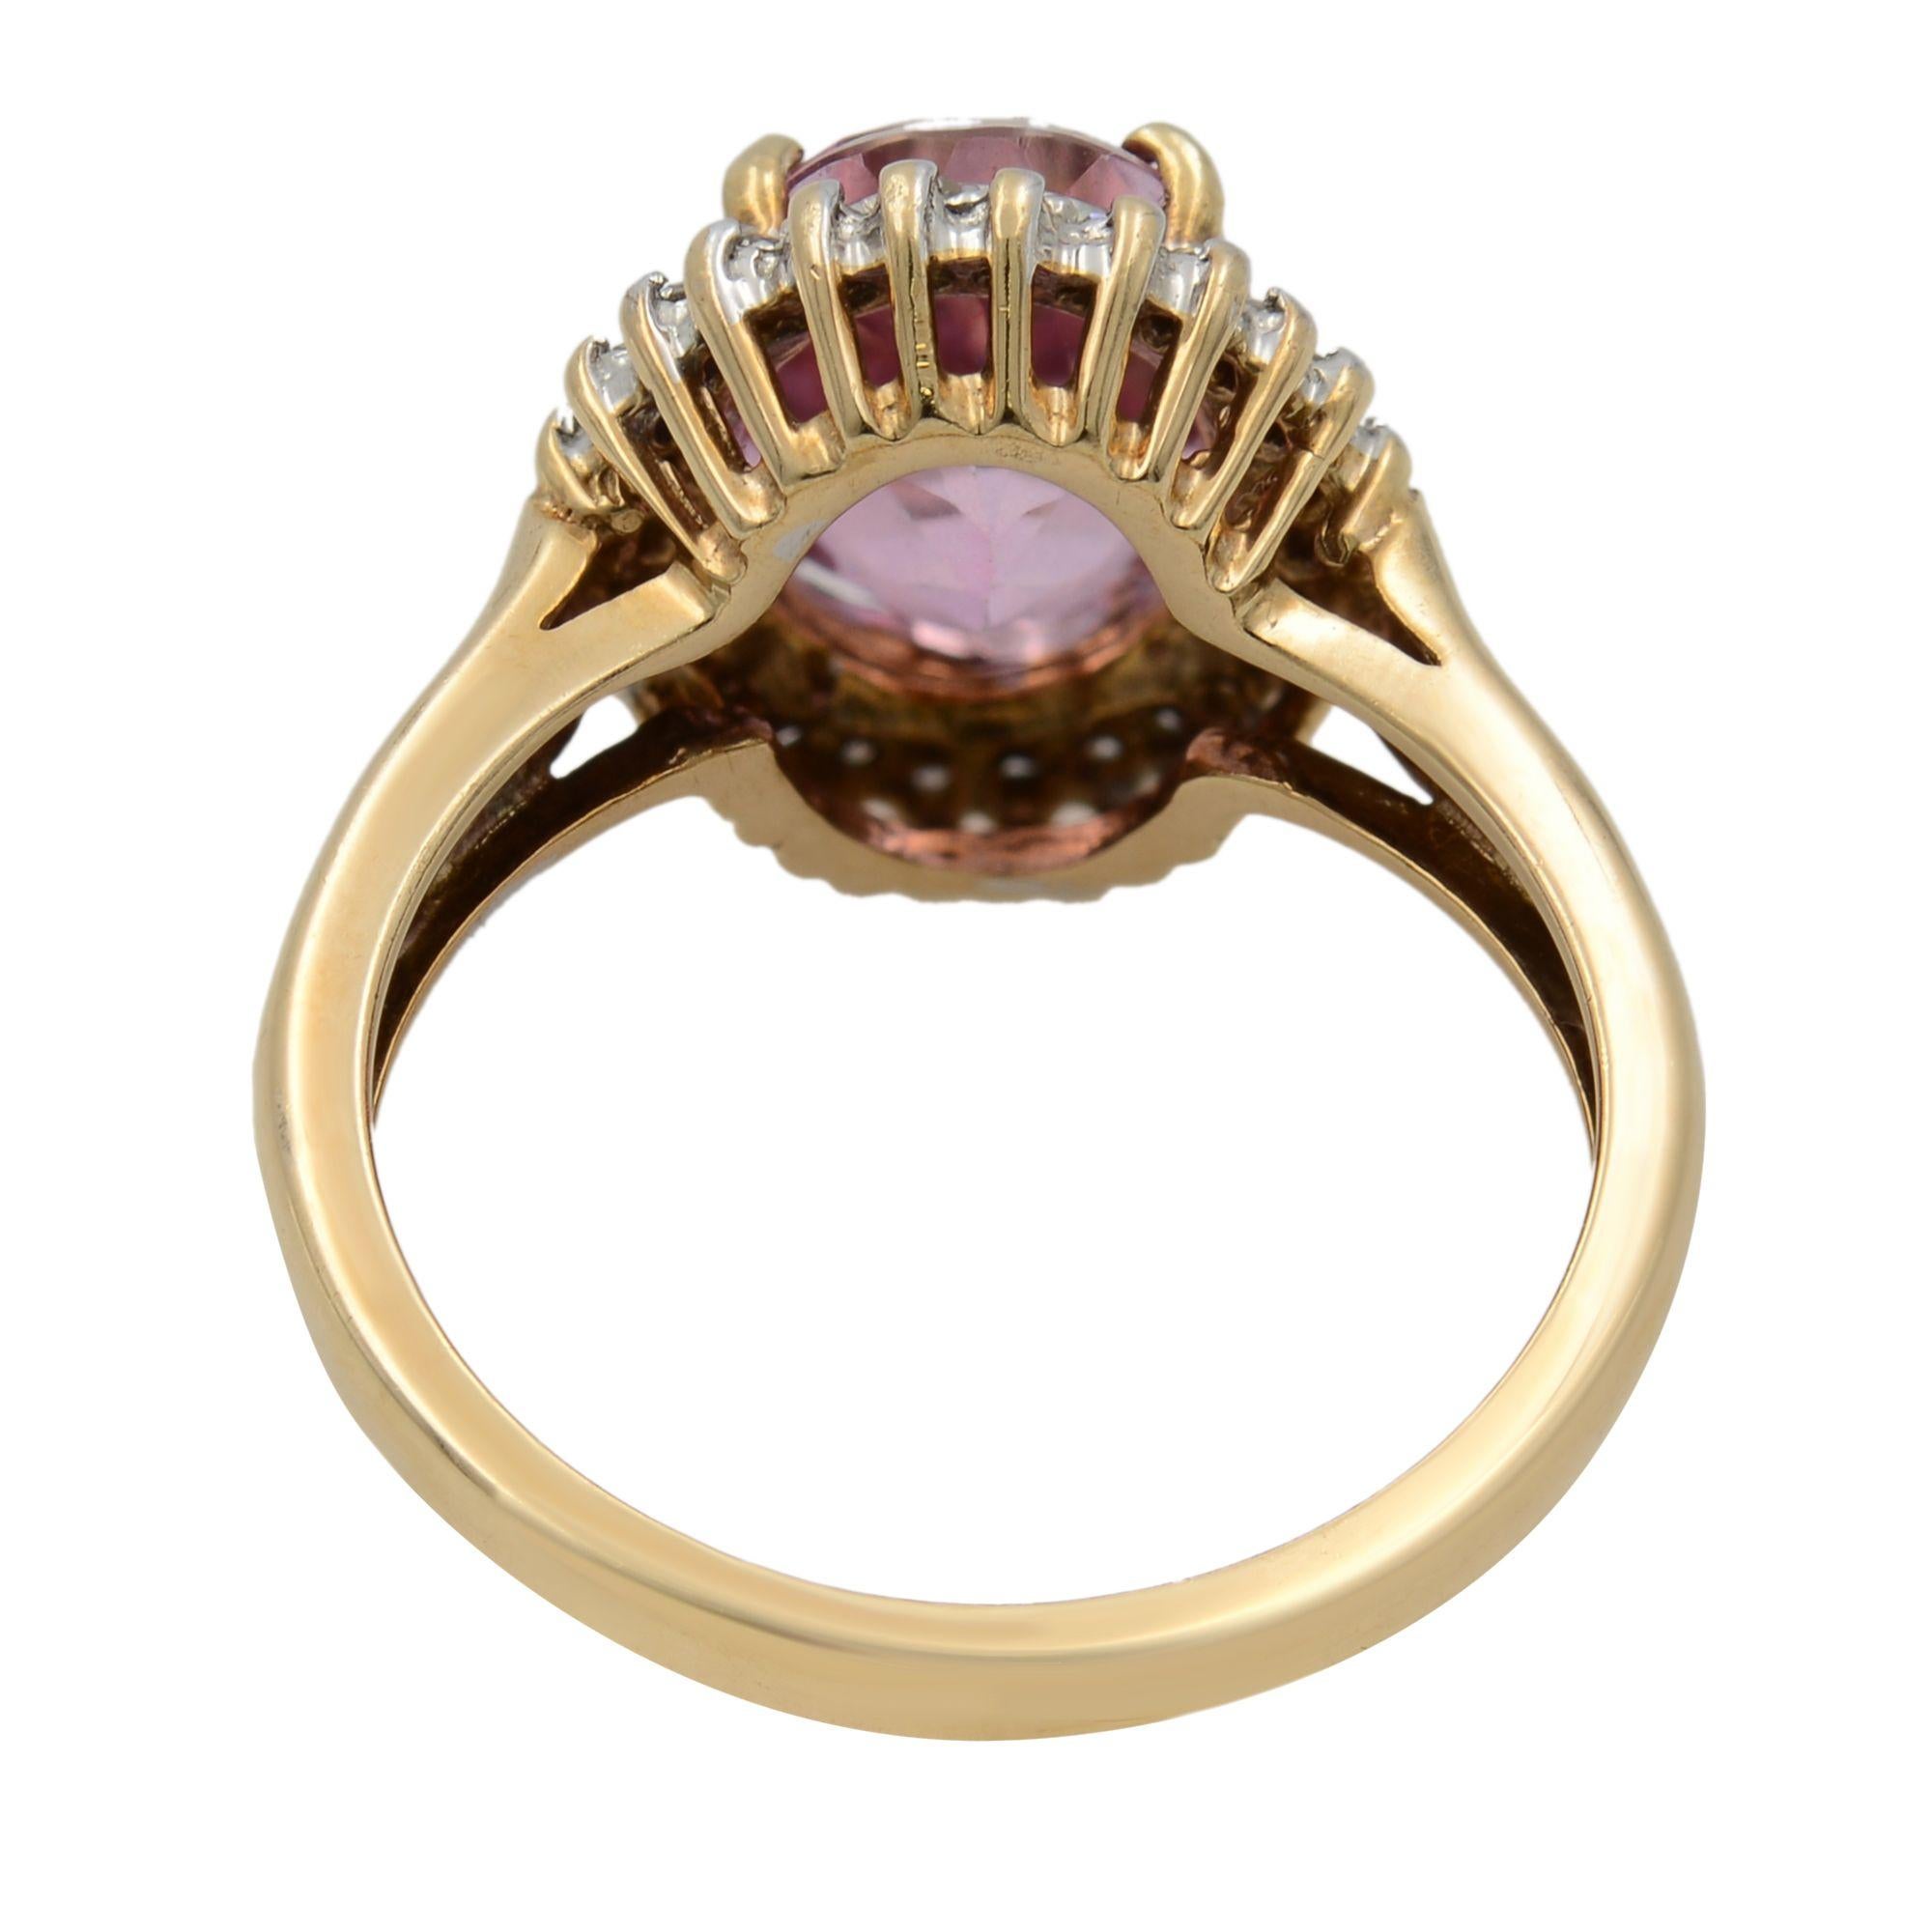 Rachel Koen Pink Tourmaline Diamond Halo Engagement Ring Yellow Gold Oval In Excellent Condition For Sale In New York, NY